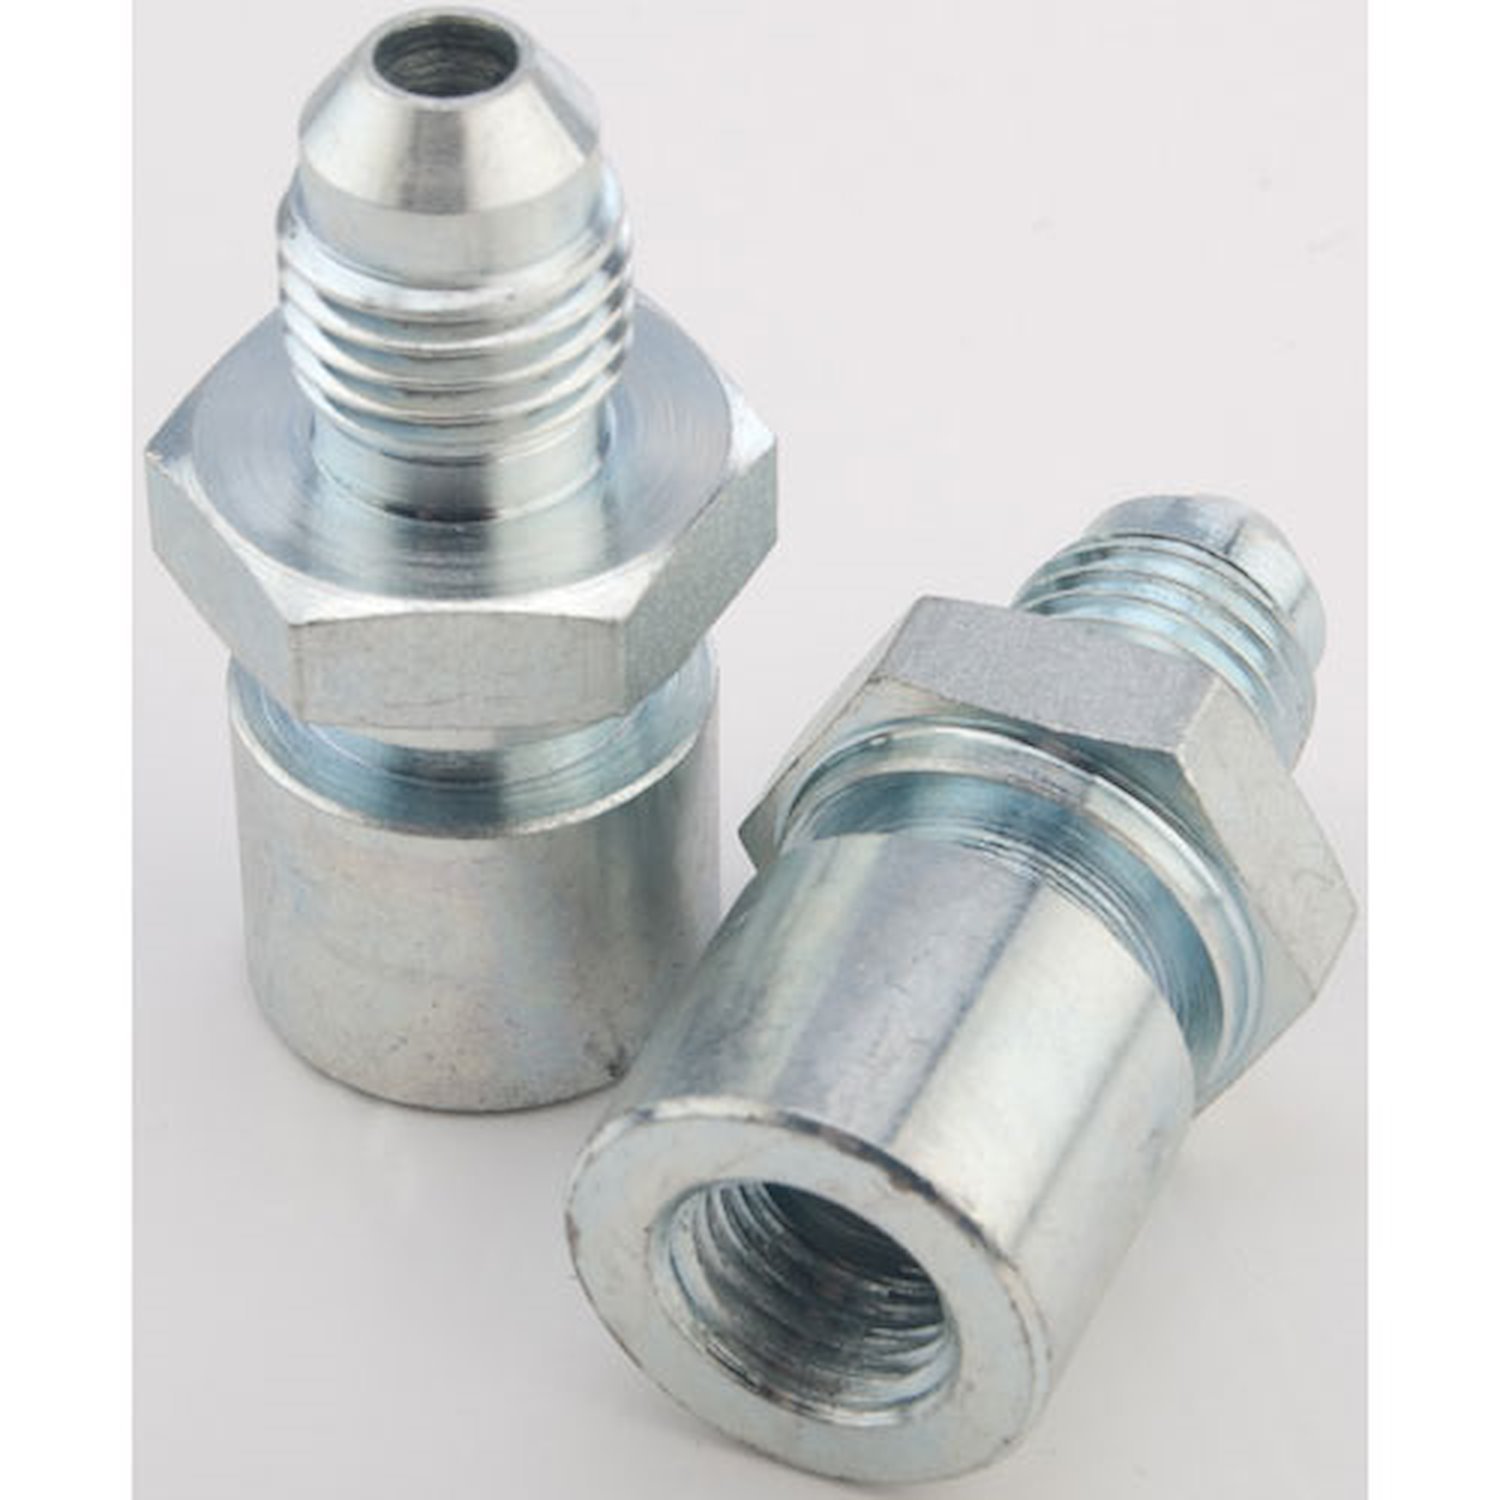 AN to Inverted Flare Female Tube Adapter Fittings [-3 AN x 7/16 in.-24 Inverted Flare]